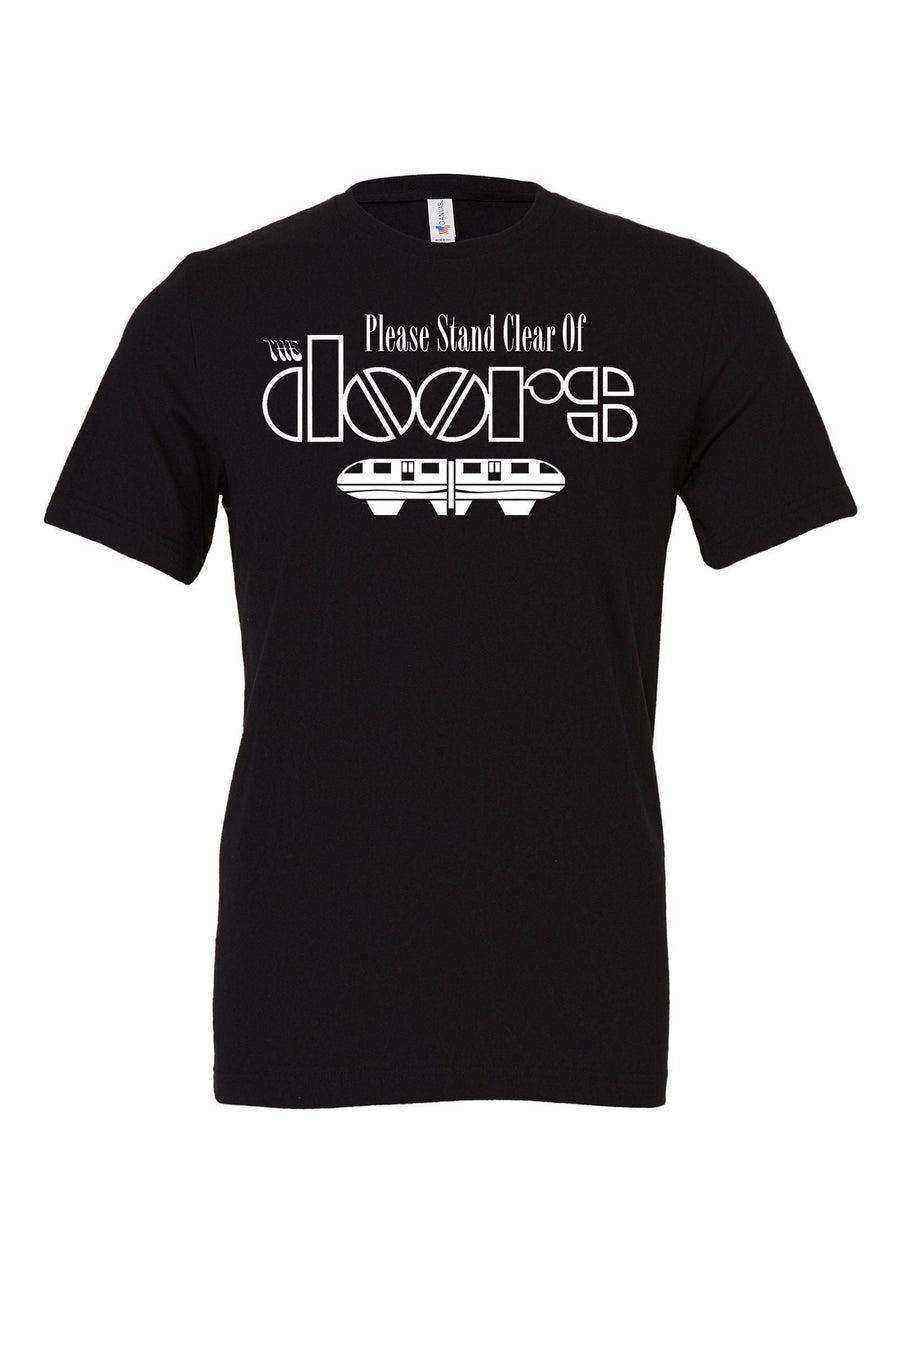 Womens | Please Stand Clear Of The Doors Shirt - Dylan's Tees